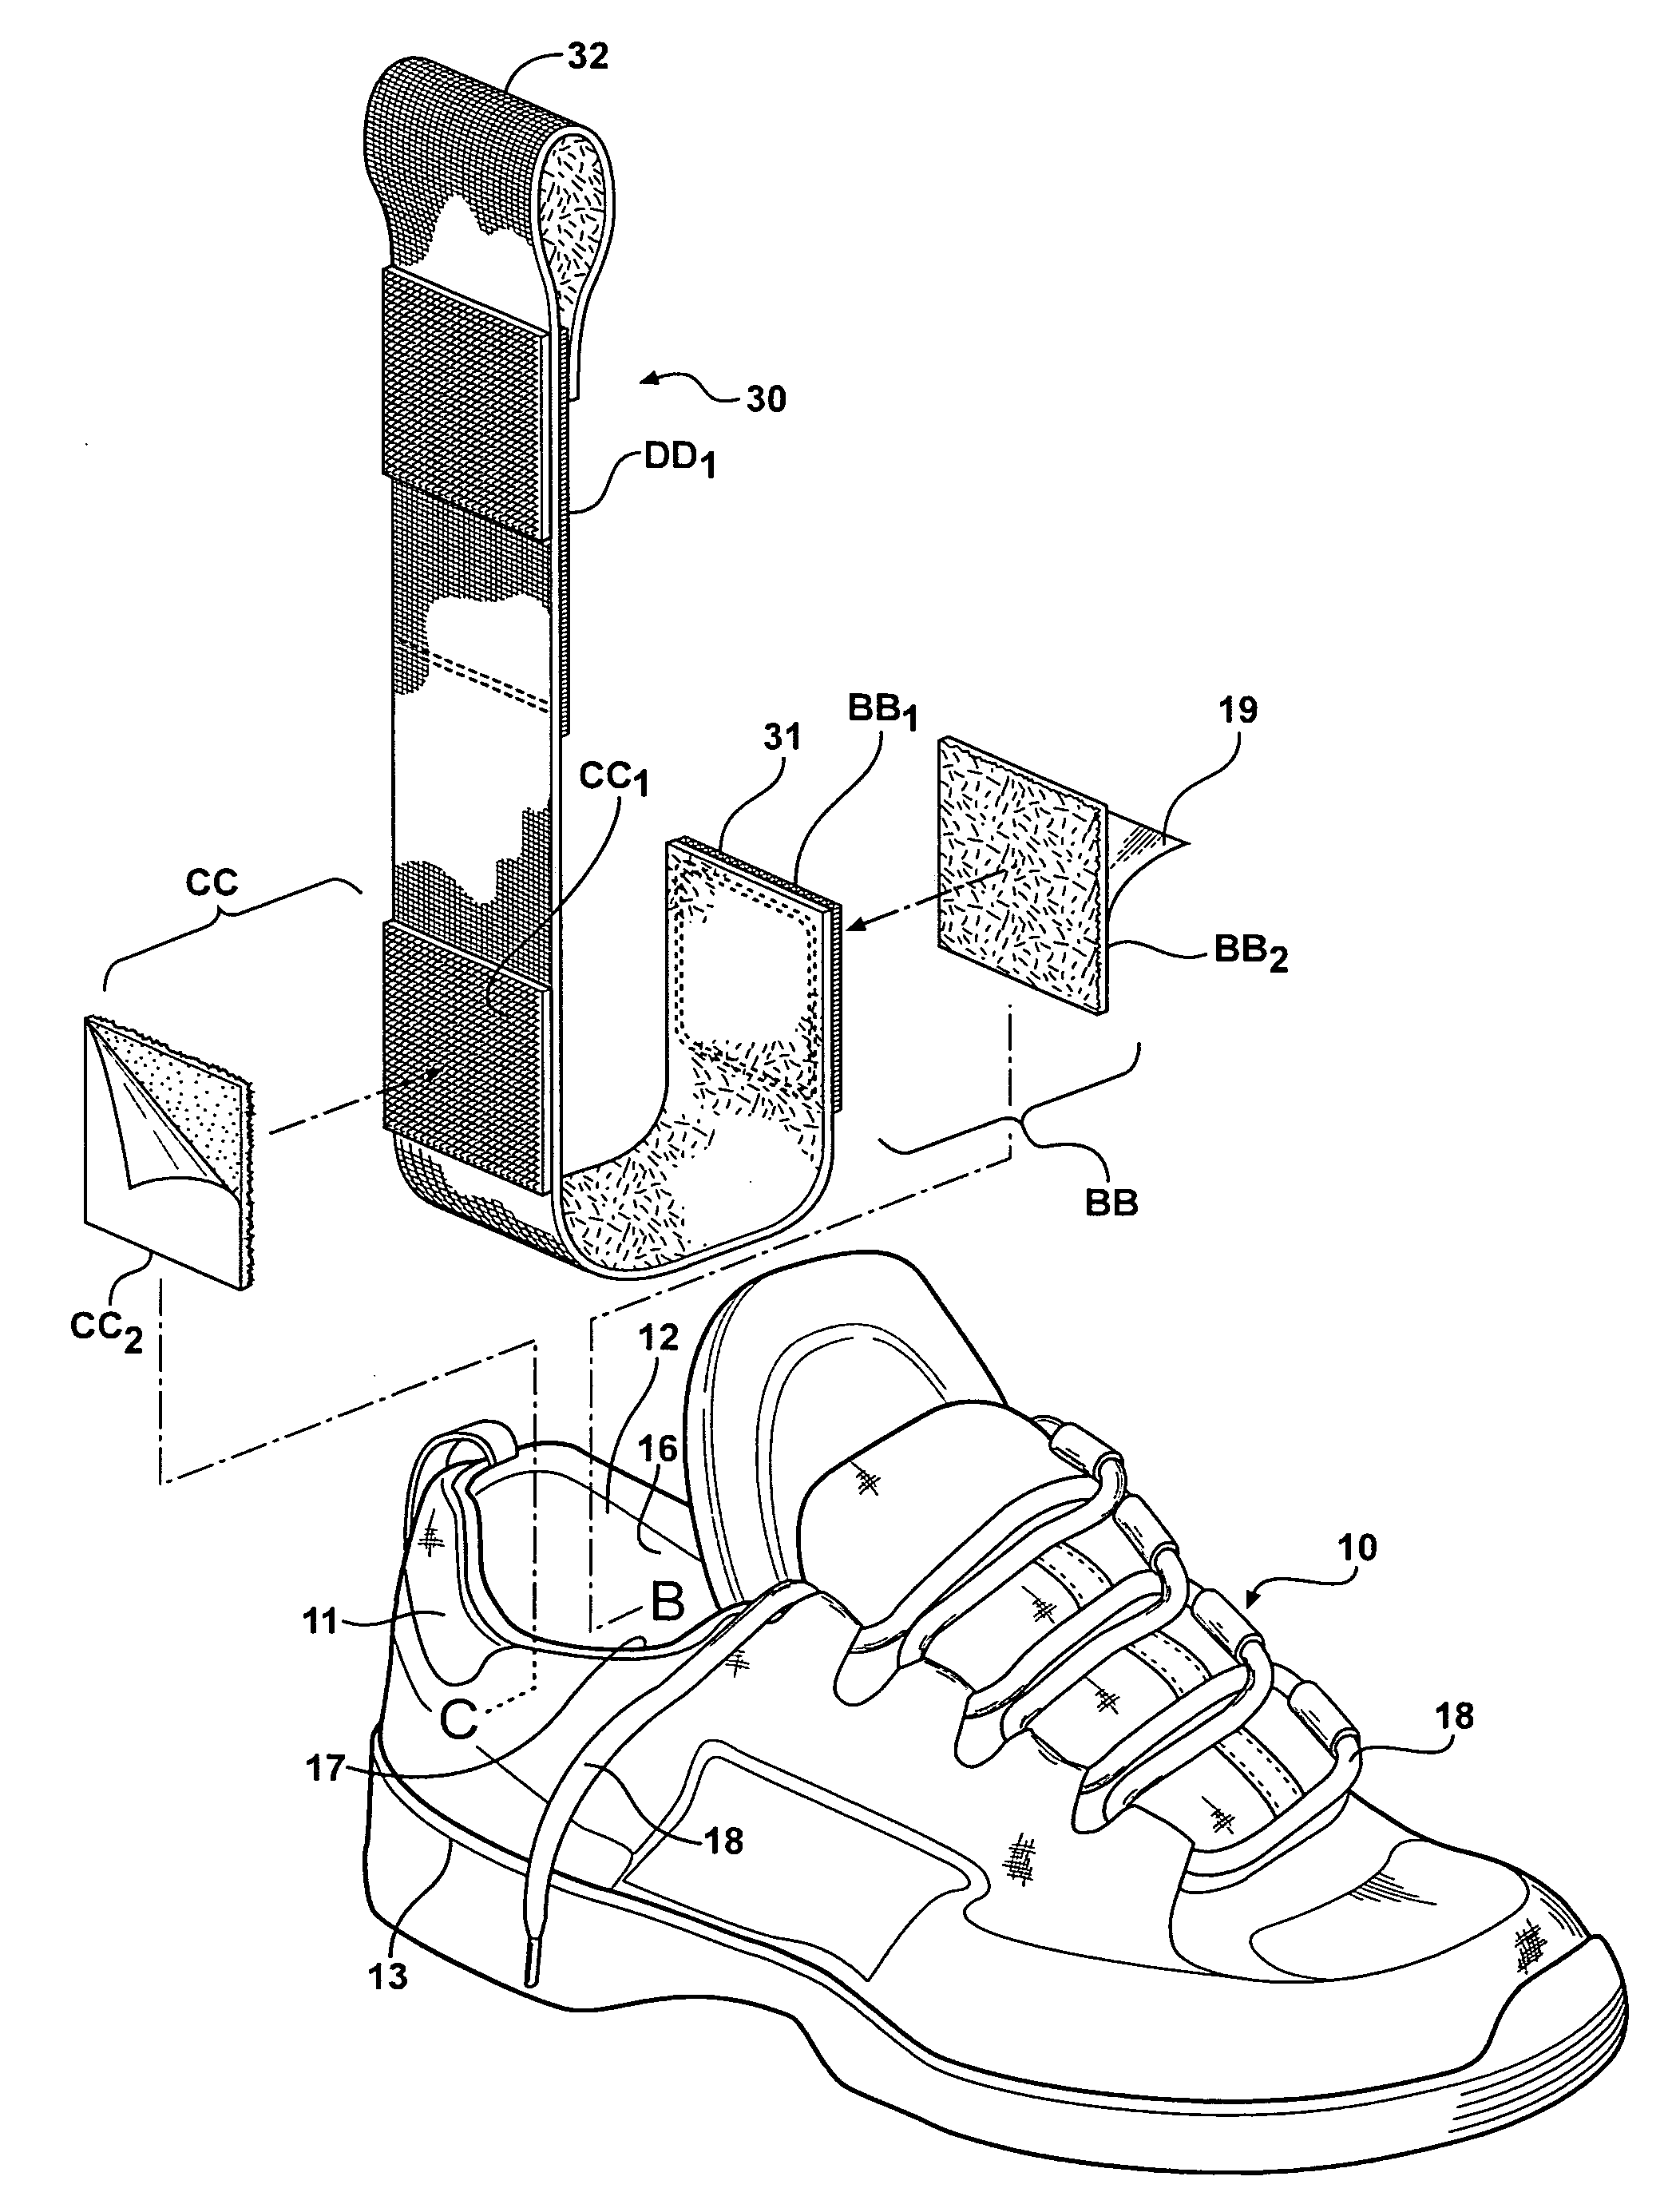 Device and method for combining an athletic shoe and conventional ankle brace to limit active ankle inversion